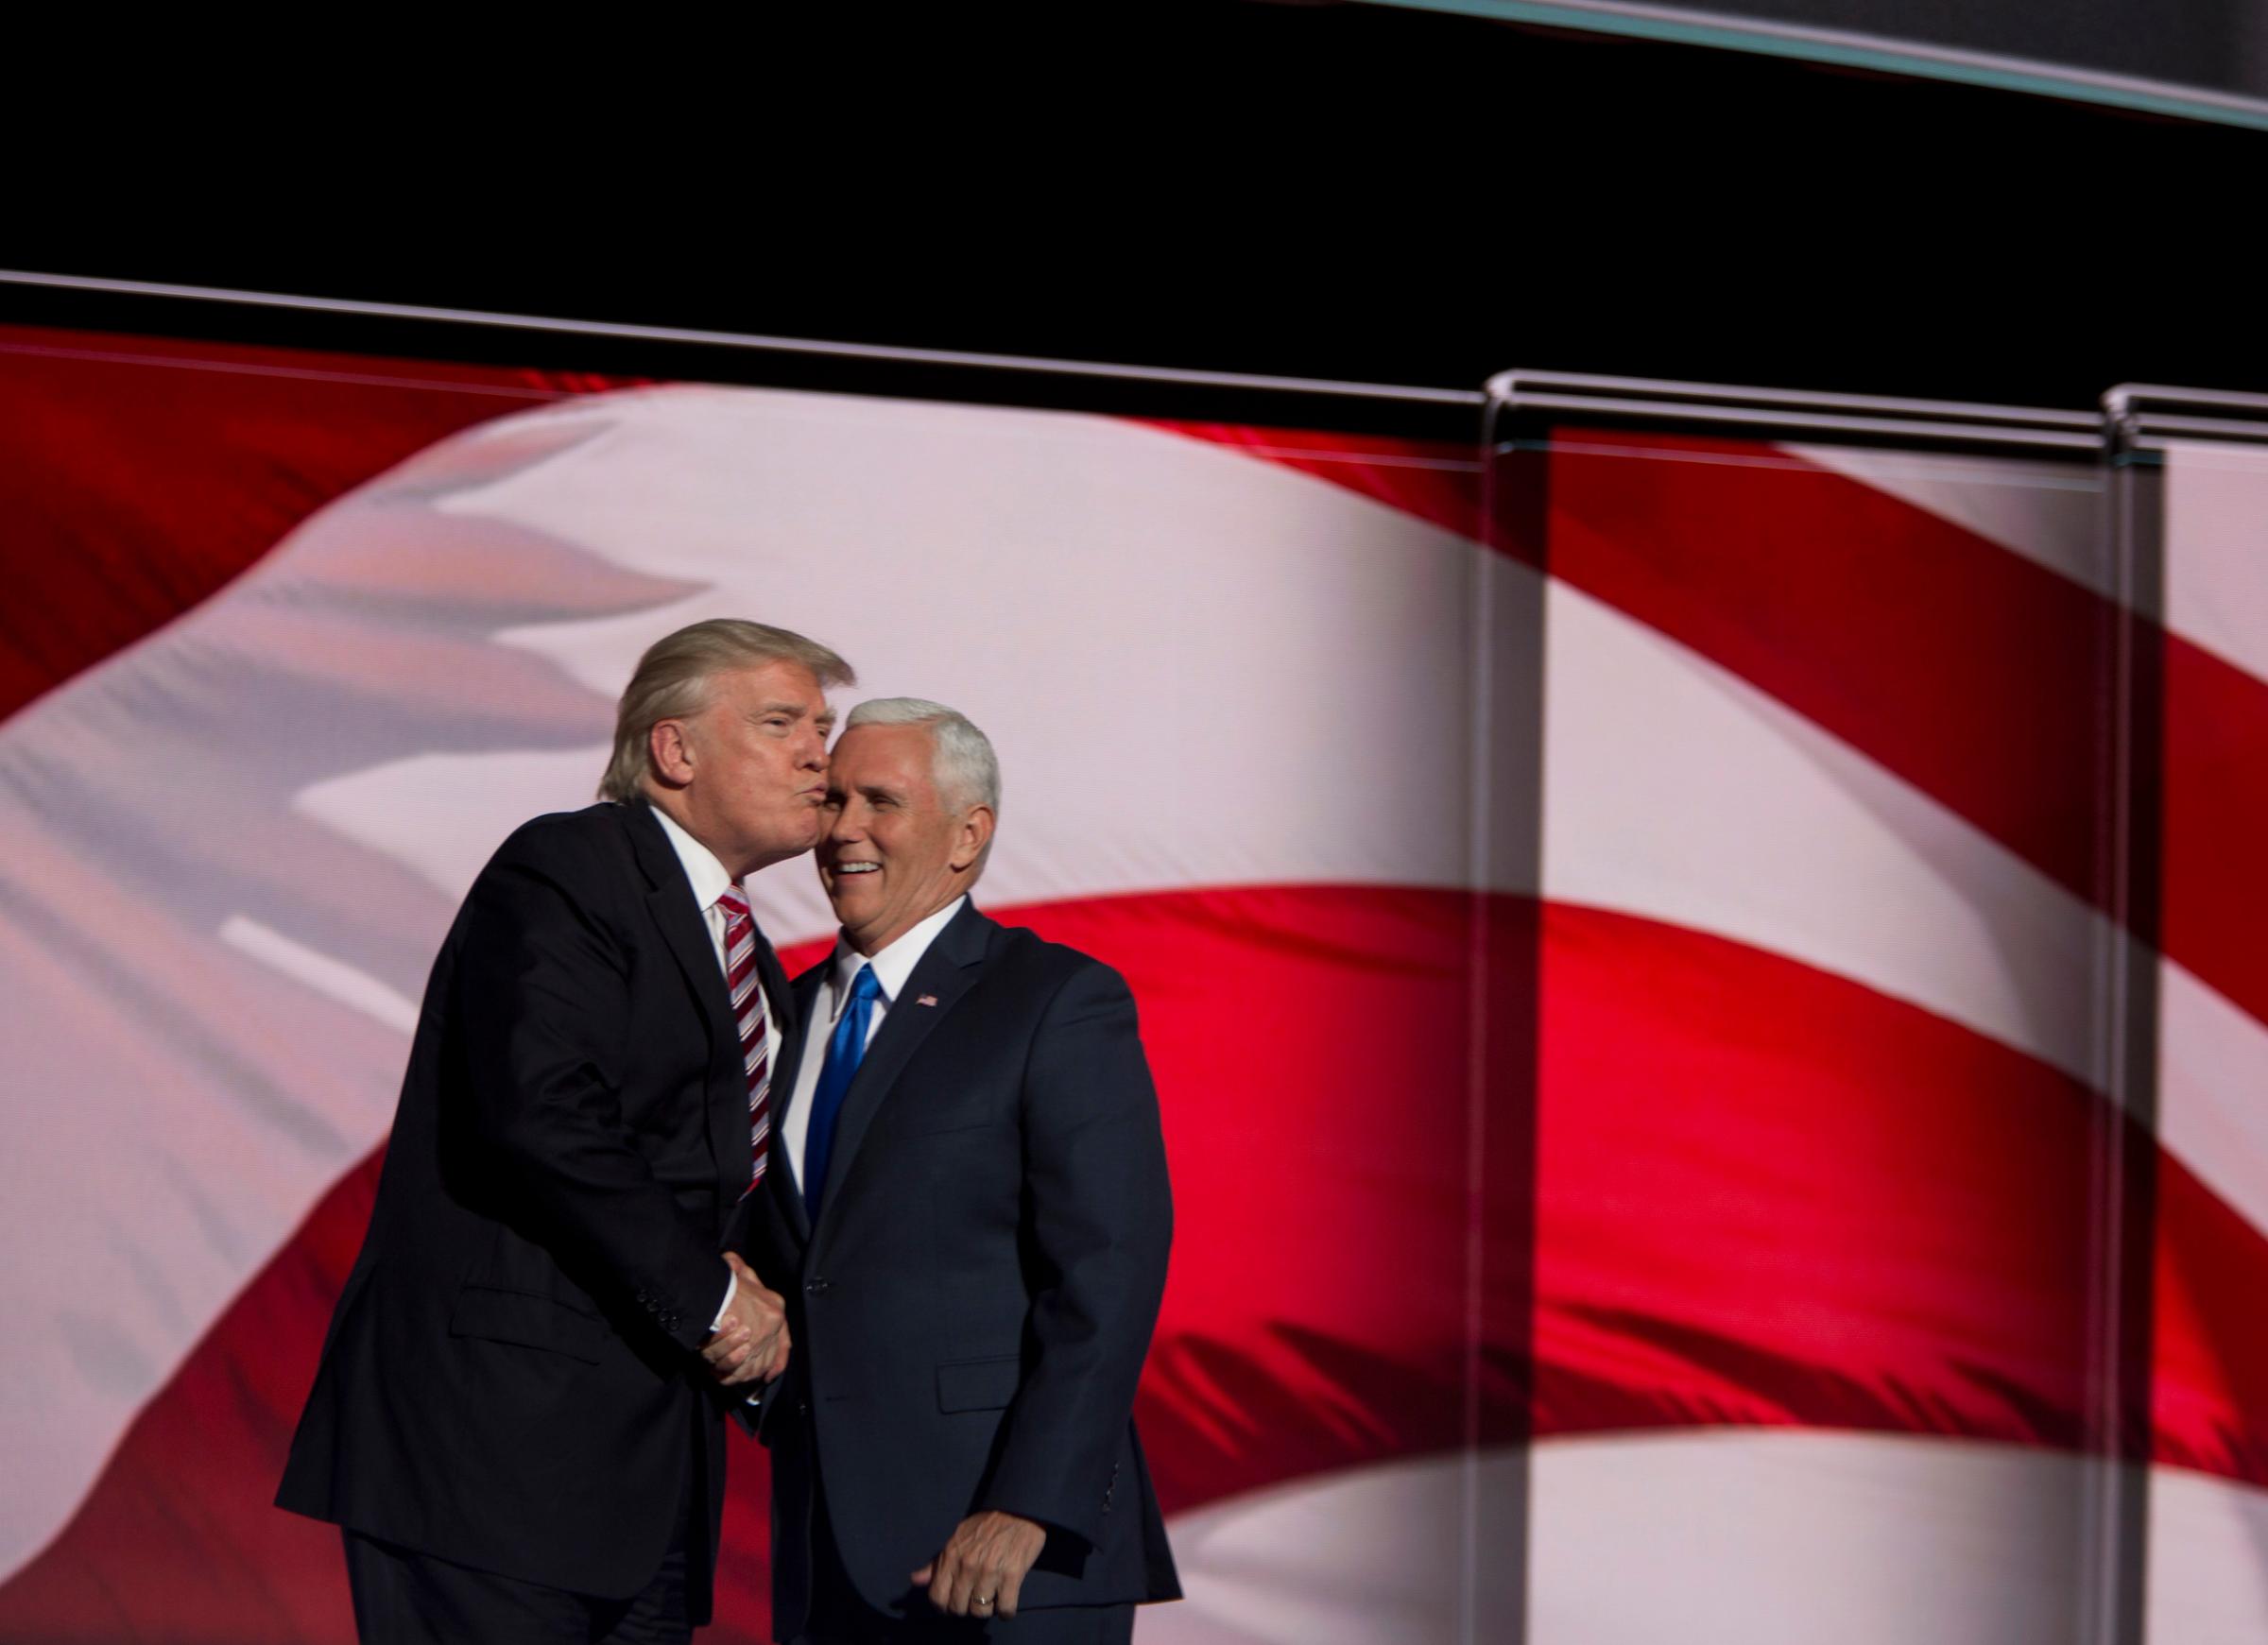 Donald Trump and  Mike Pence on stage at the 2016 Republican National Convention in Cleveland, Ohio, on July 20, 2016.